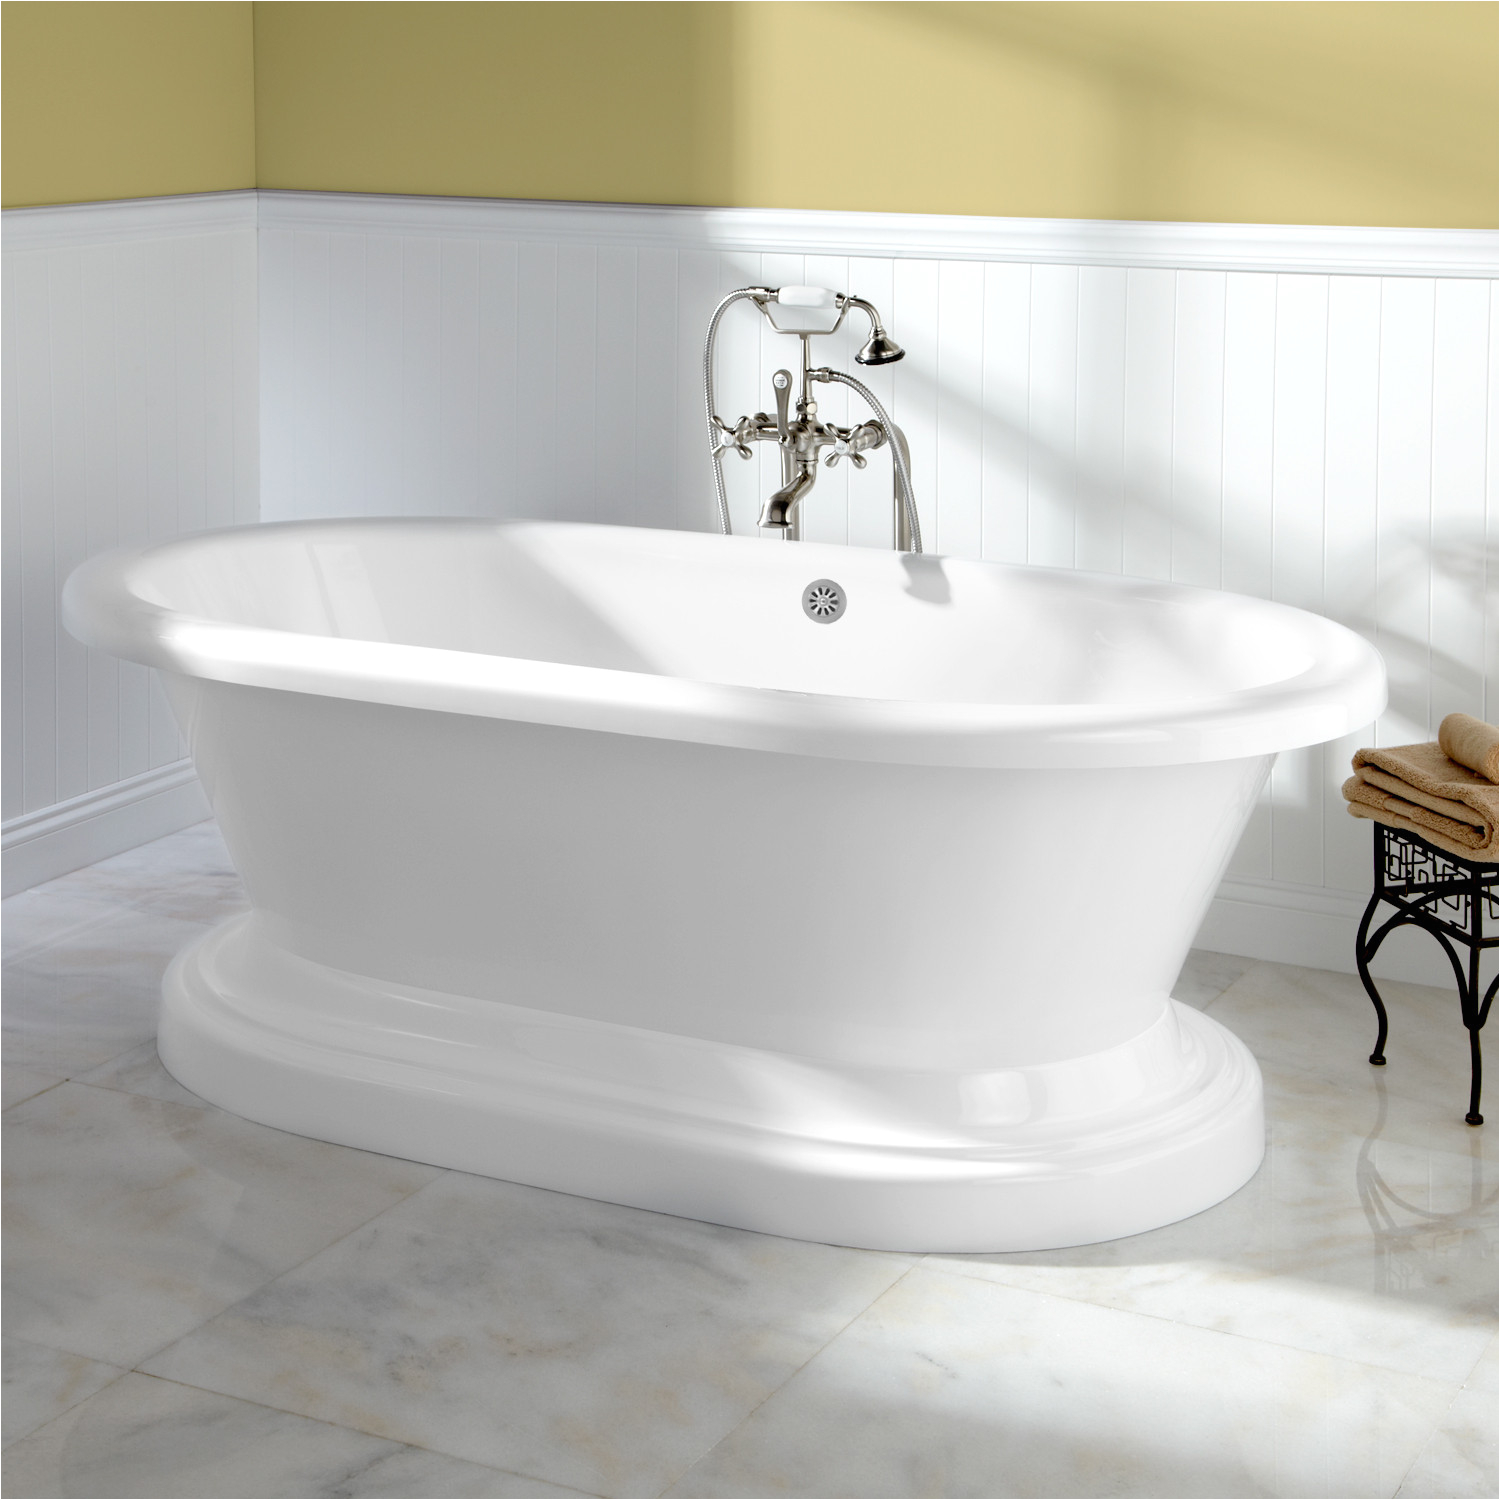 71 bali double ended tub on plinth